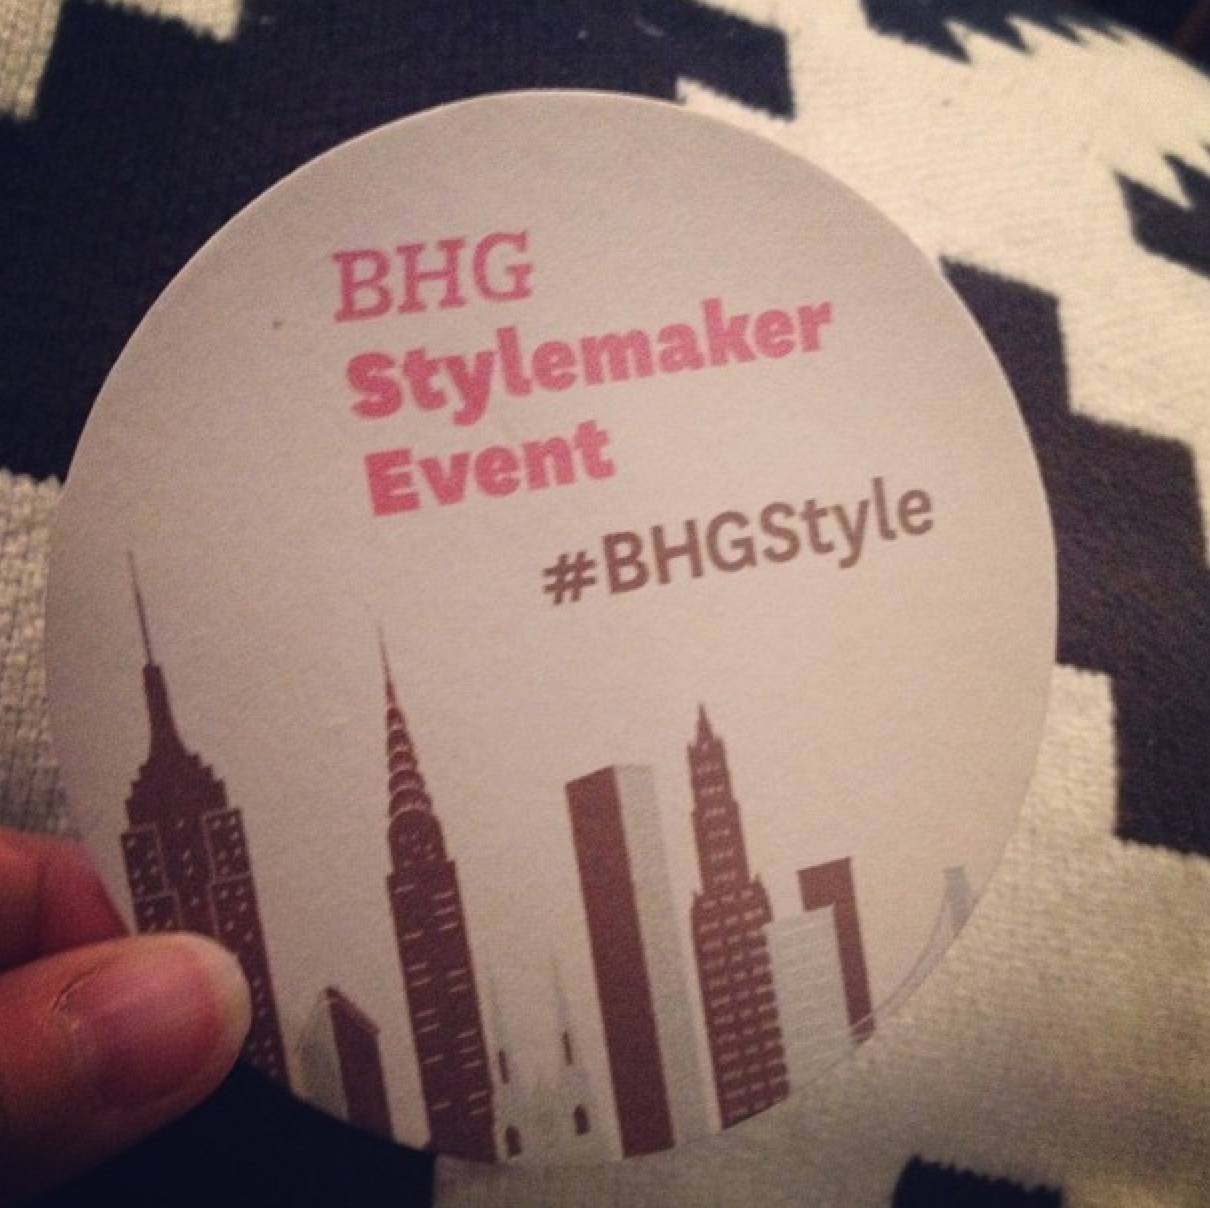 Better Homes and Gardens Stylemaker Event #BHGstyle